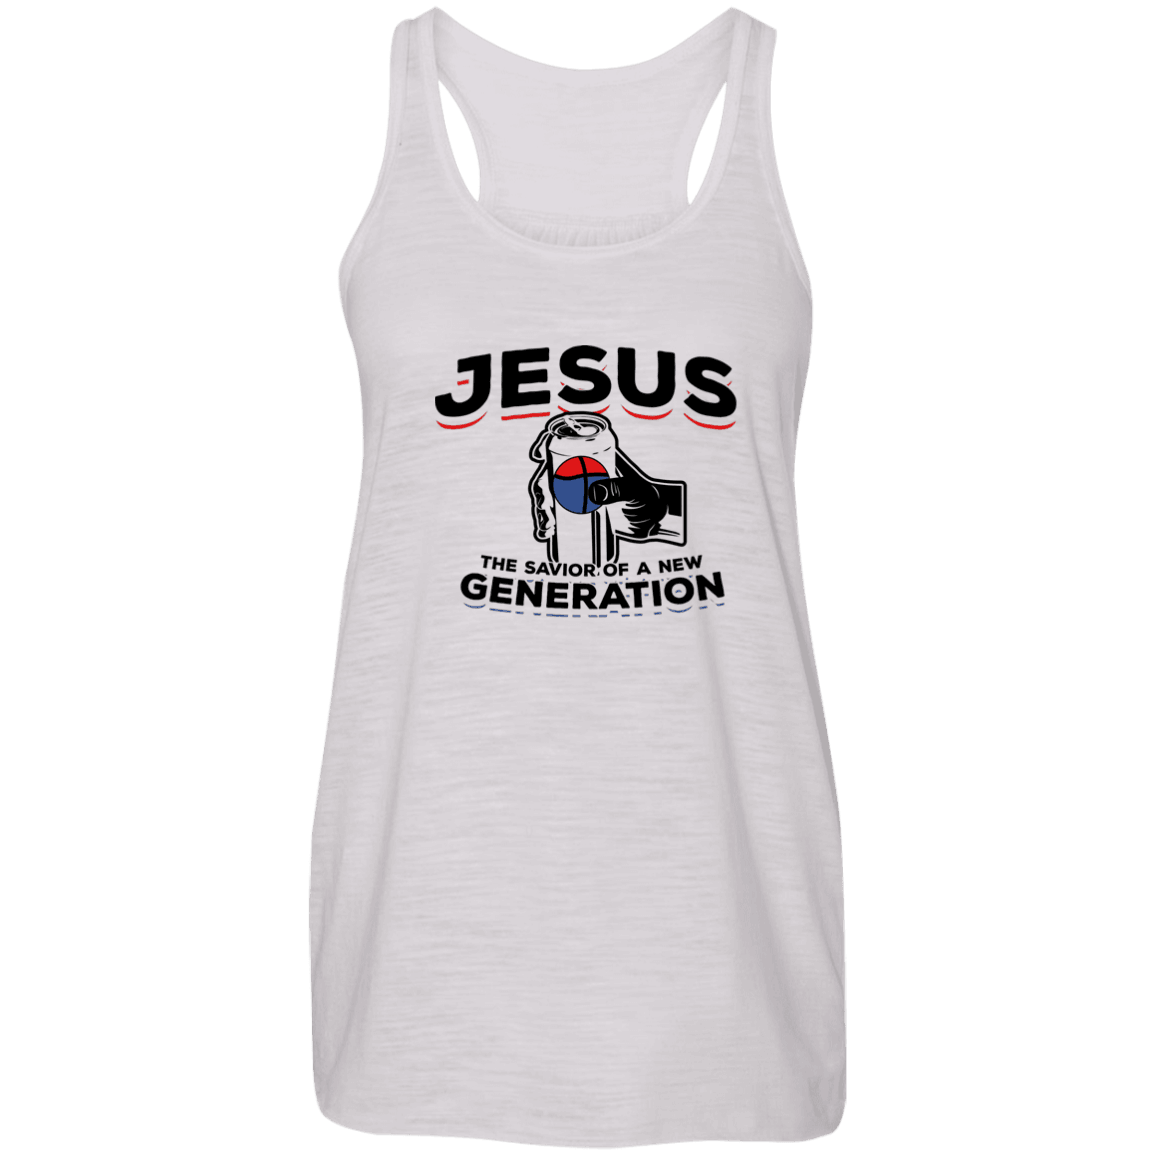 Designs by MyUtopia Shout Out:Jesus Savior of New Generation Ladies Flowy Racer-back Tank Top,X-Small / Vintage White,Tank Tops